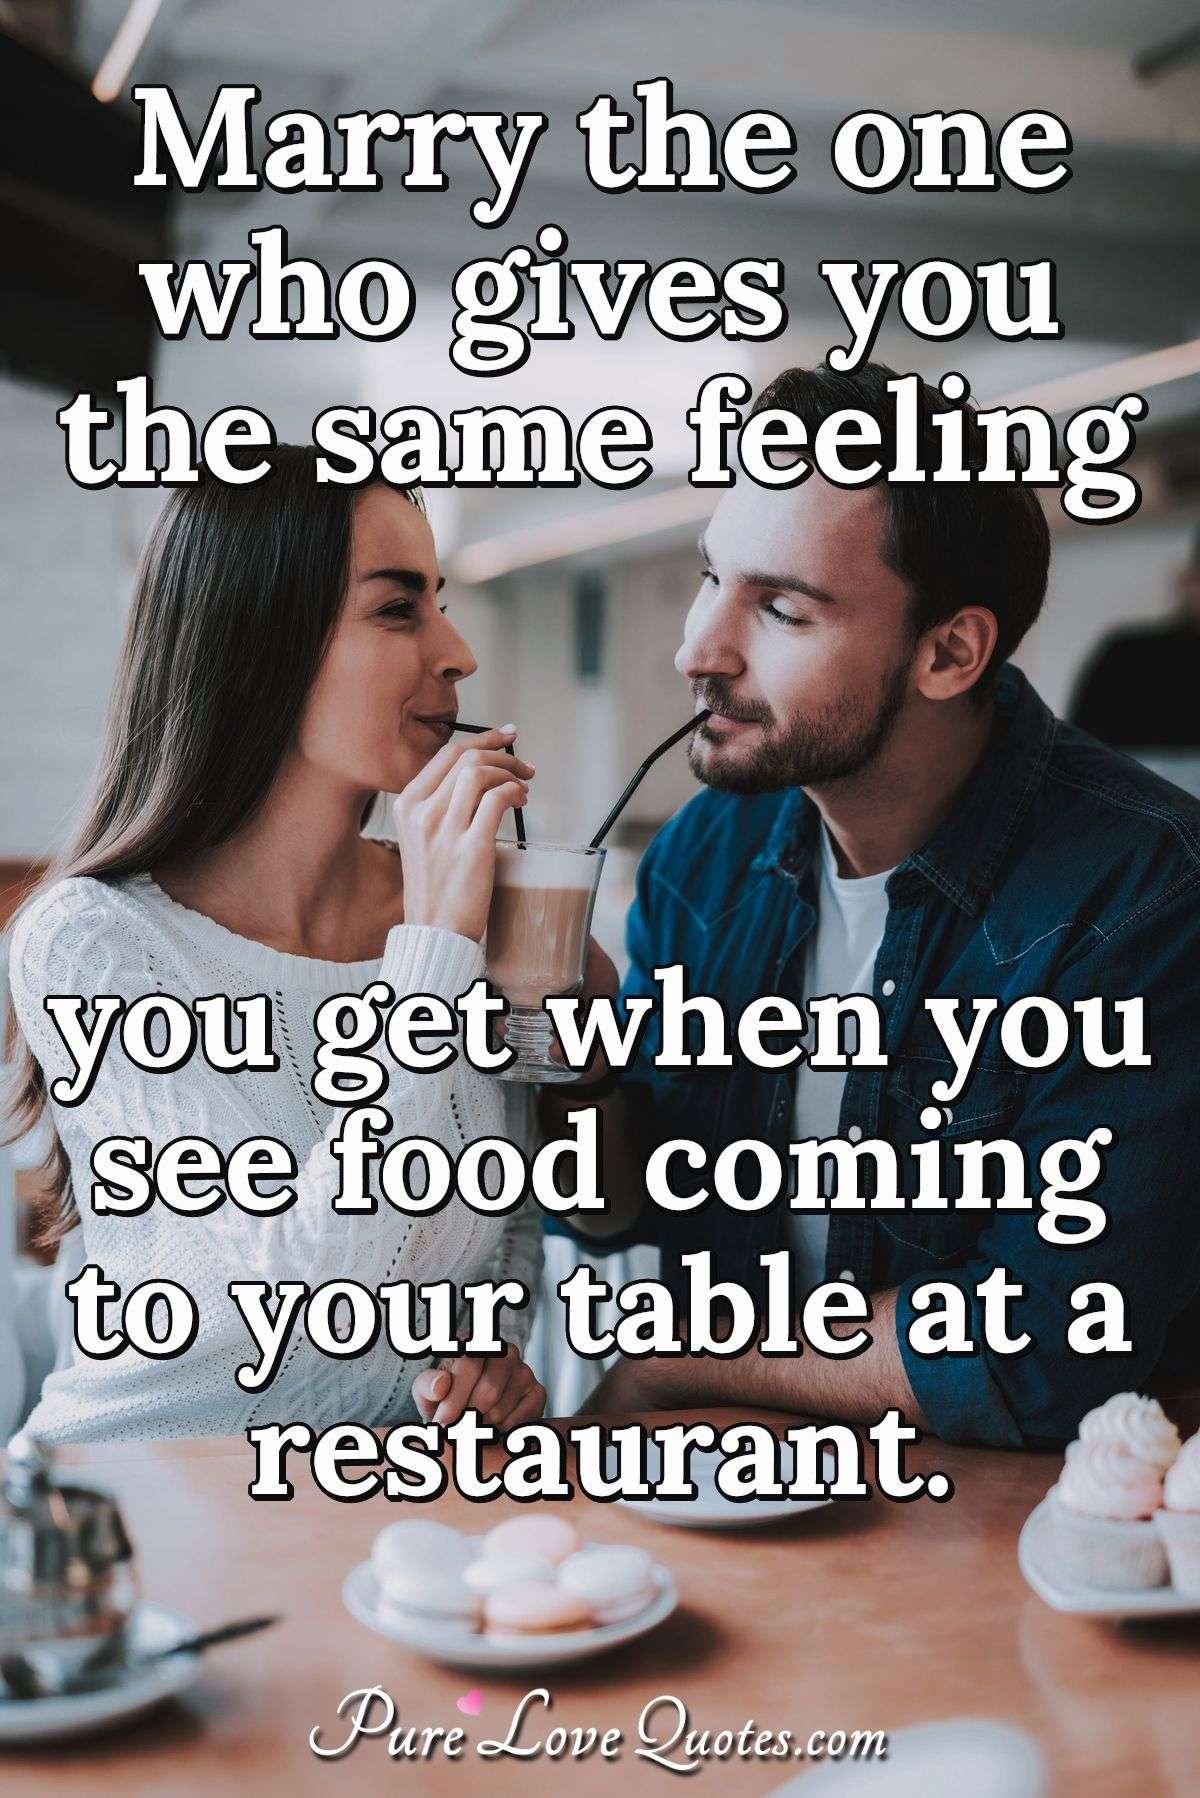 Marry the one who gives you the same feeling you get when you see food coming to your table at a restaurant. - Anonymous